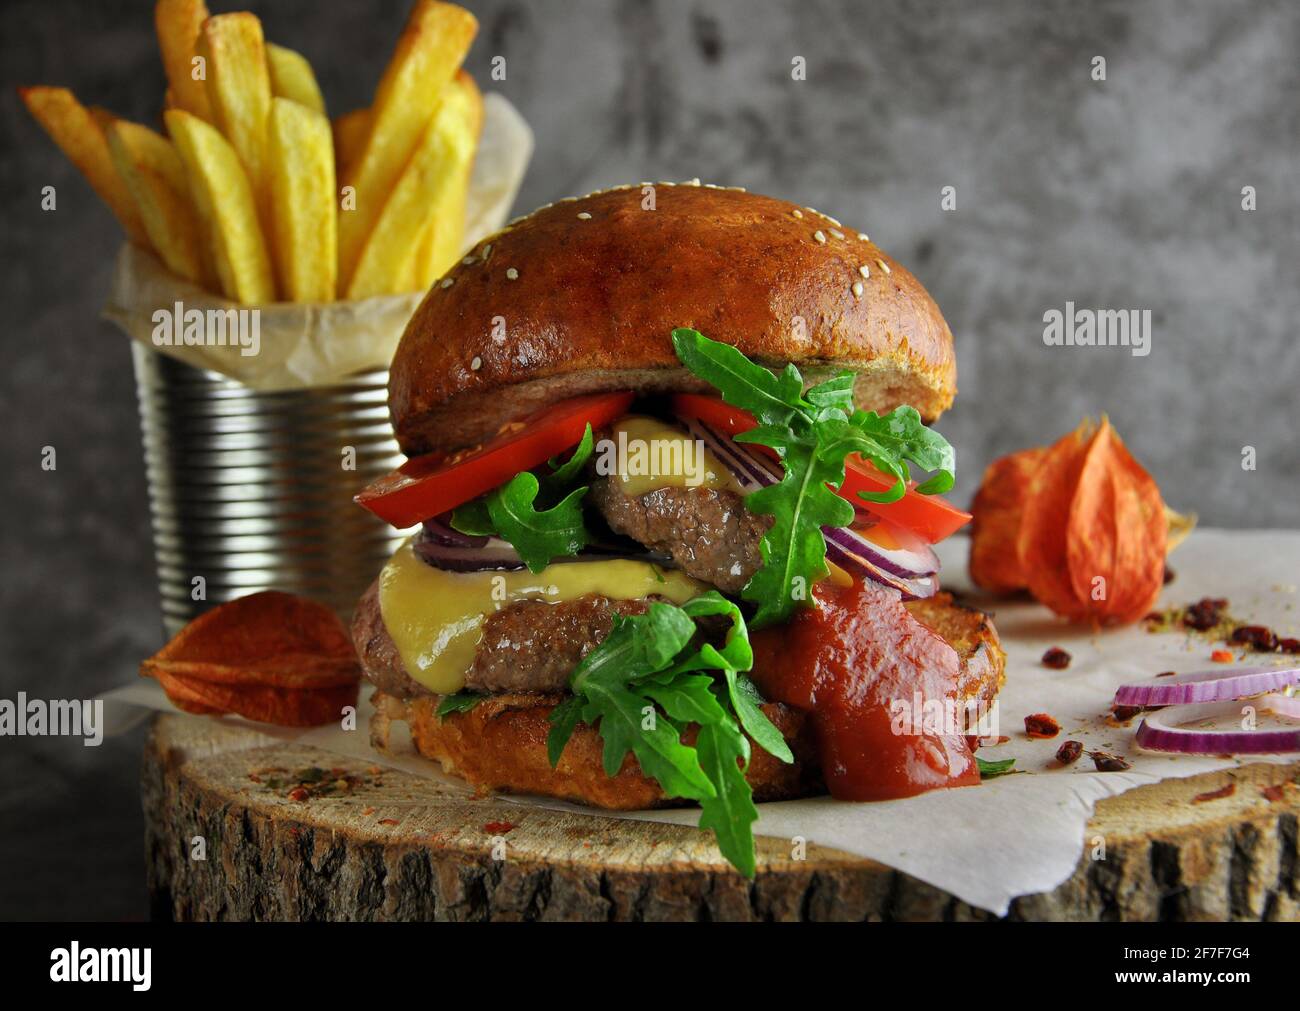 Beef burger with melted cheese. Fast food Stock Photo